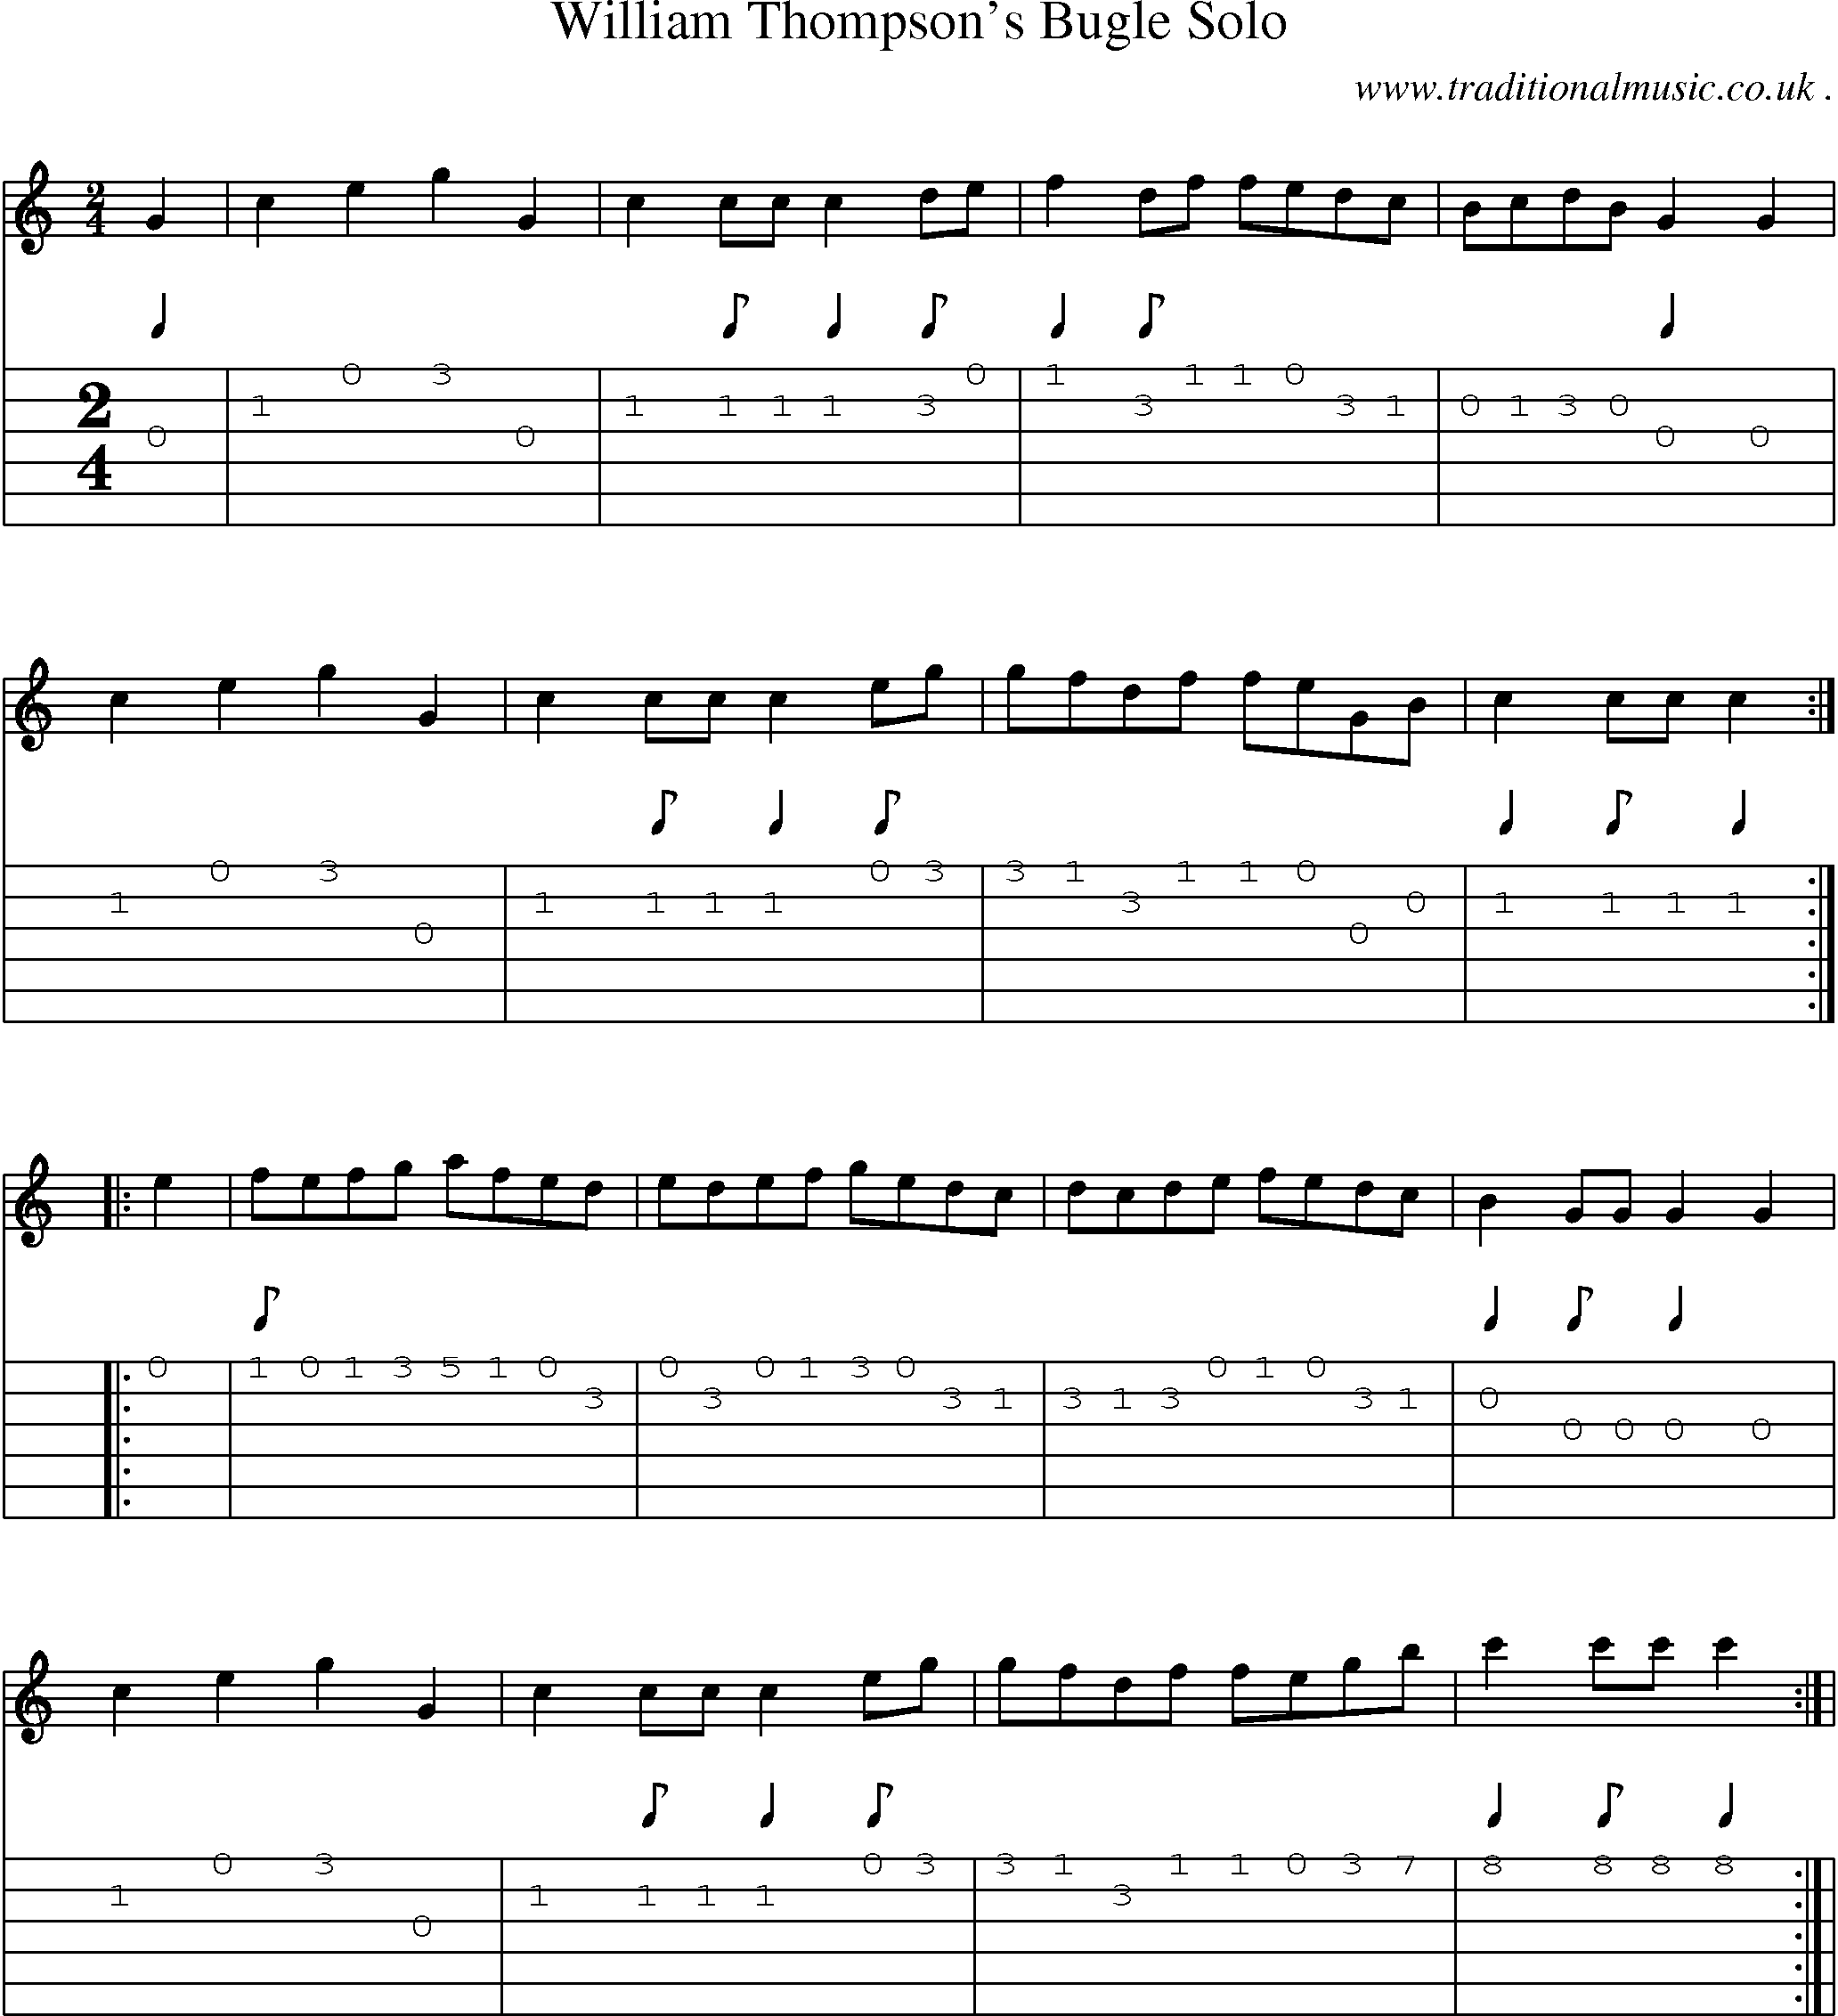 Sheet-Music and Guitar Tabs for William Thompsons Bugle Solo